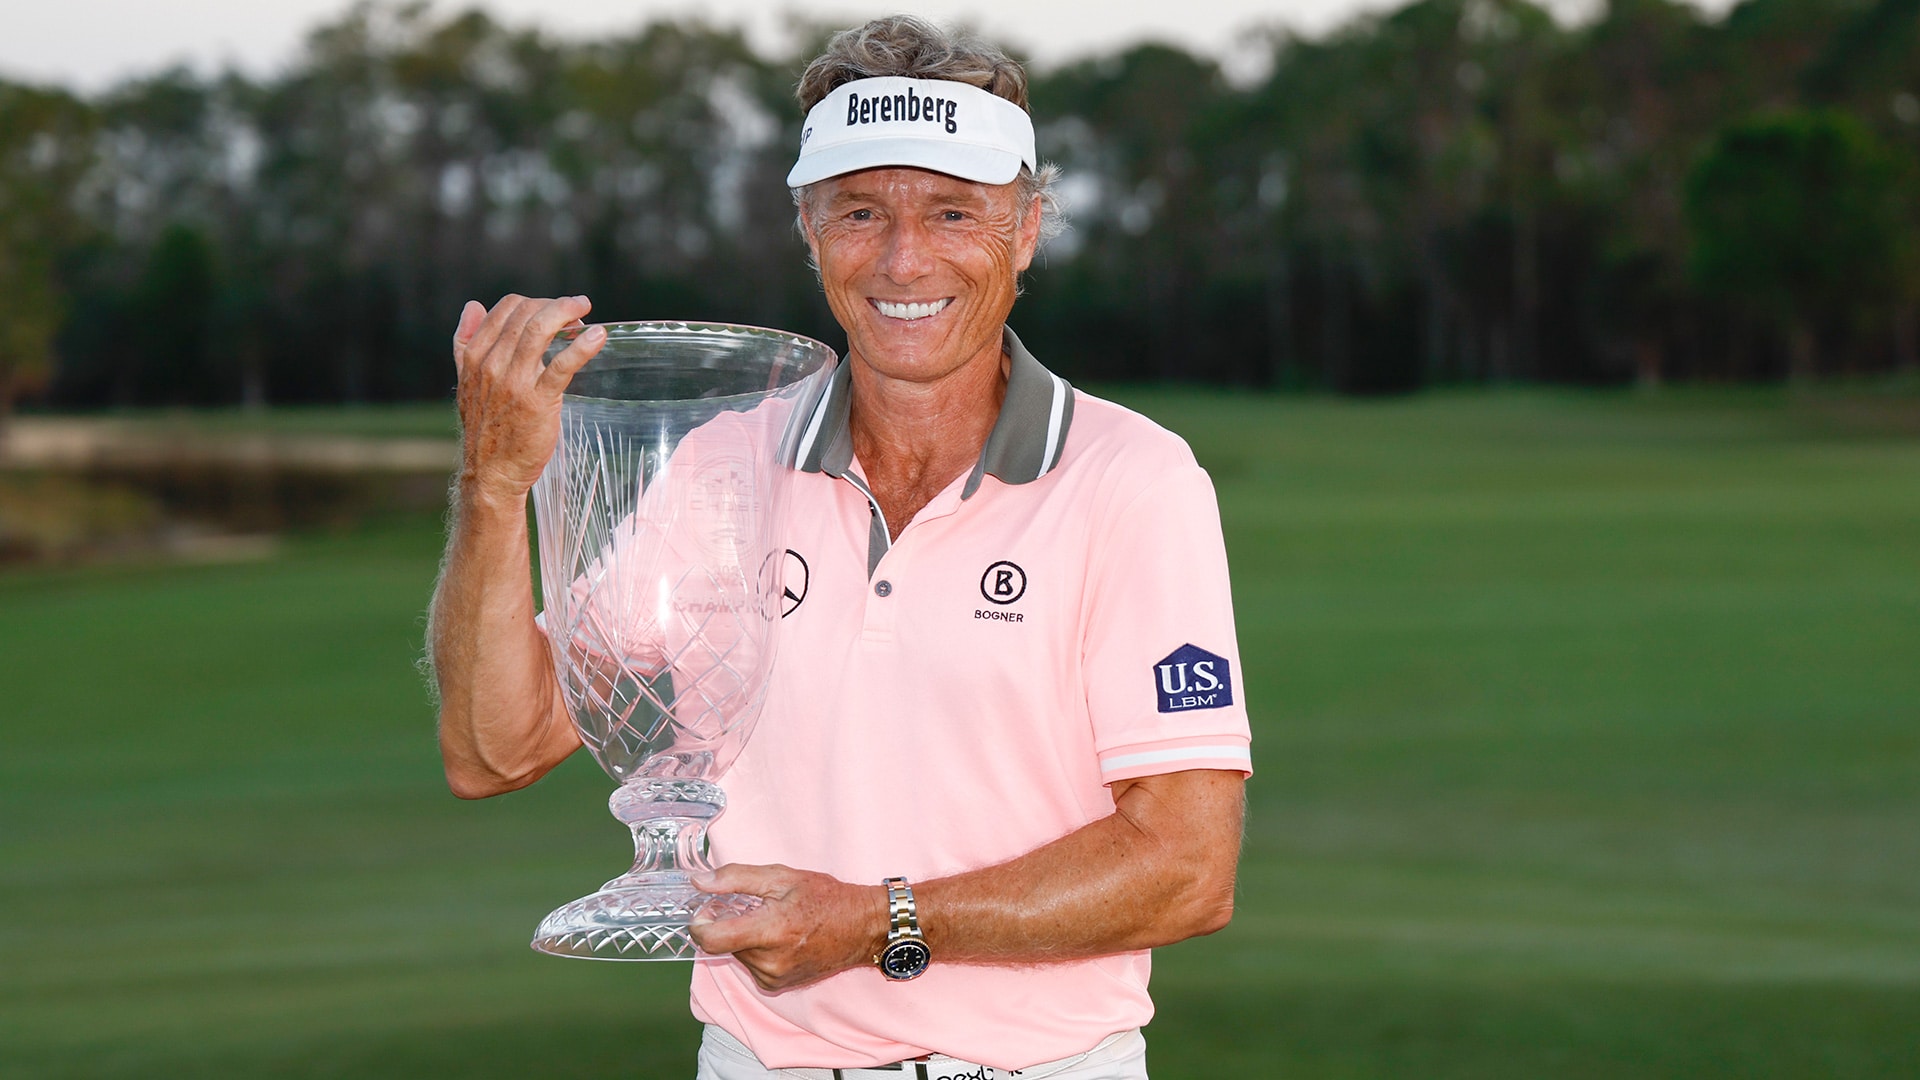 Benrhard Langer ties Hale Irwin for most PGA Tour Champions wins with No. 45